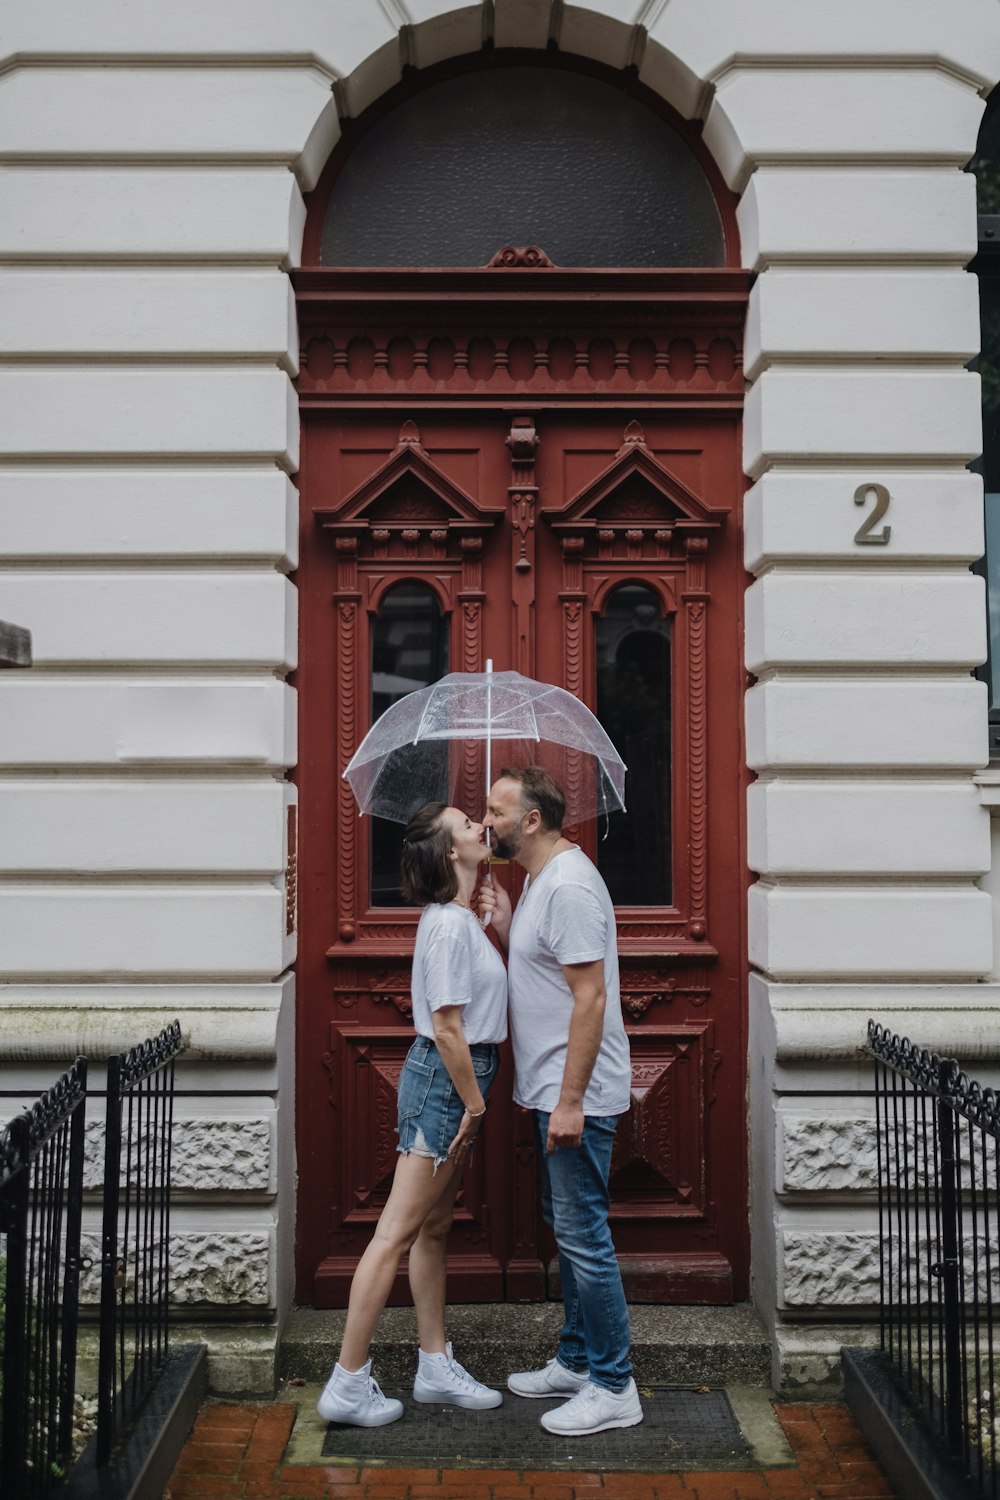 a couple kissing under an umbrella in front of a building